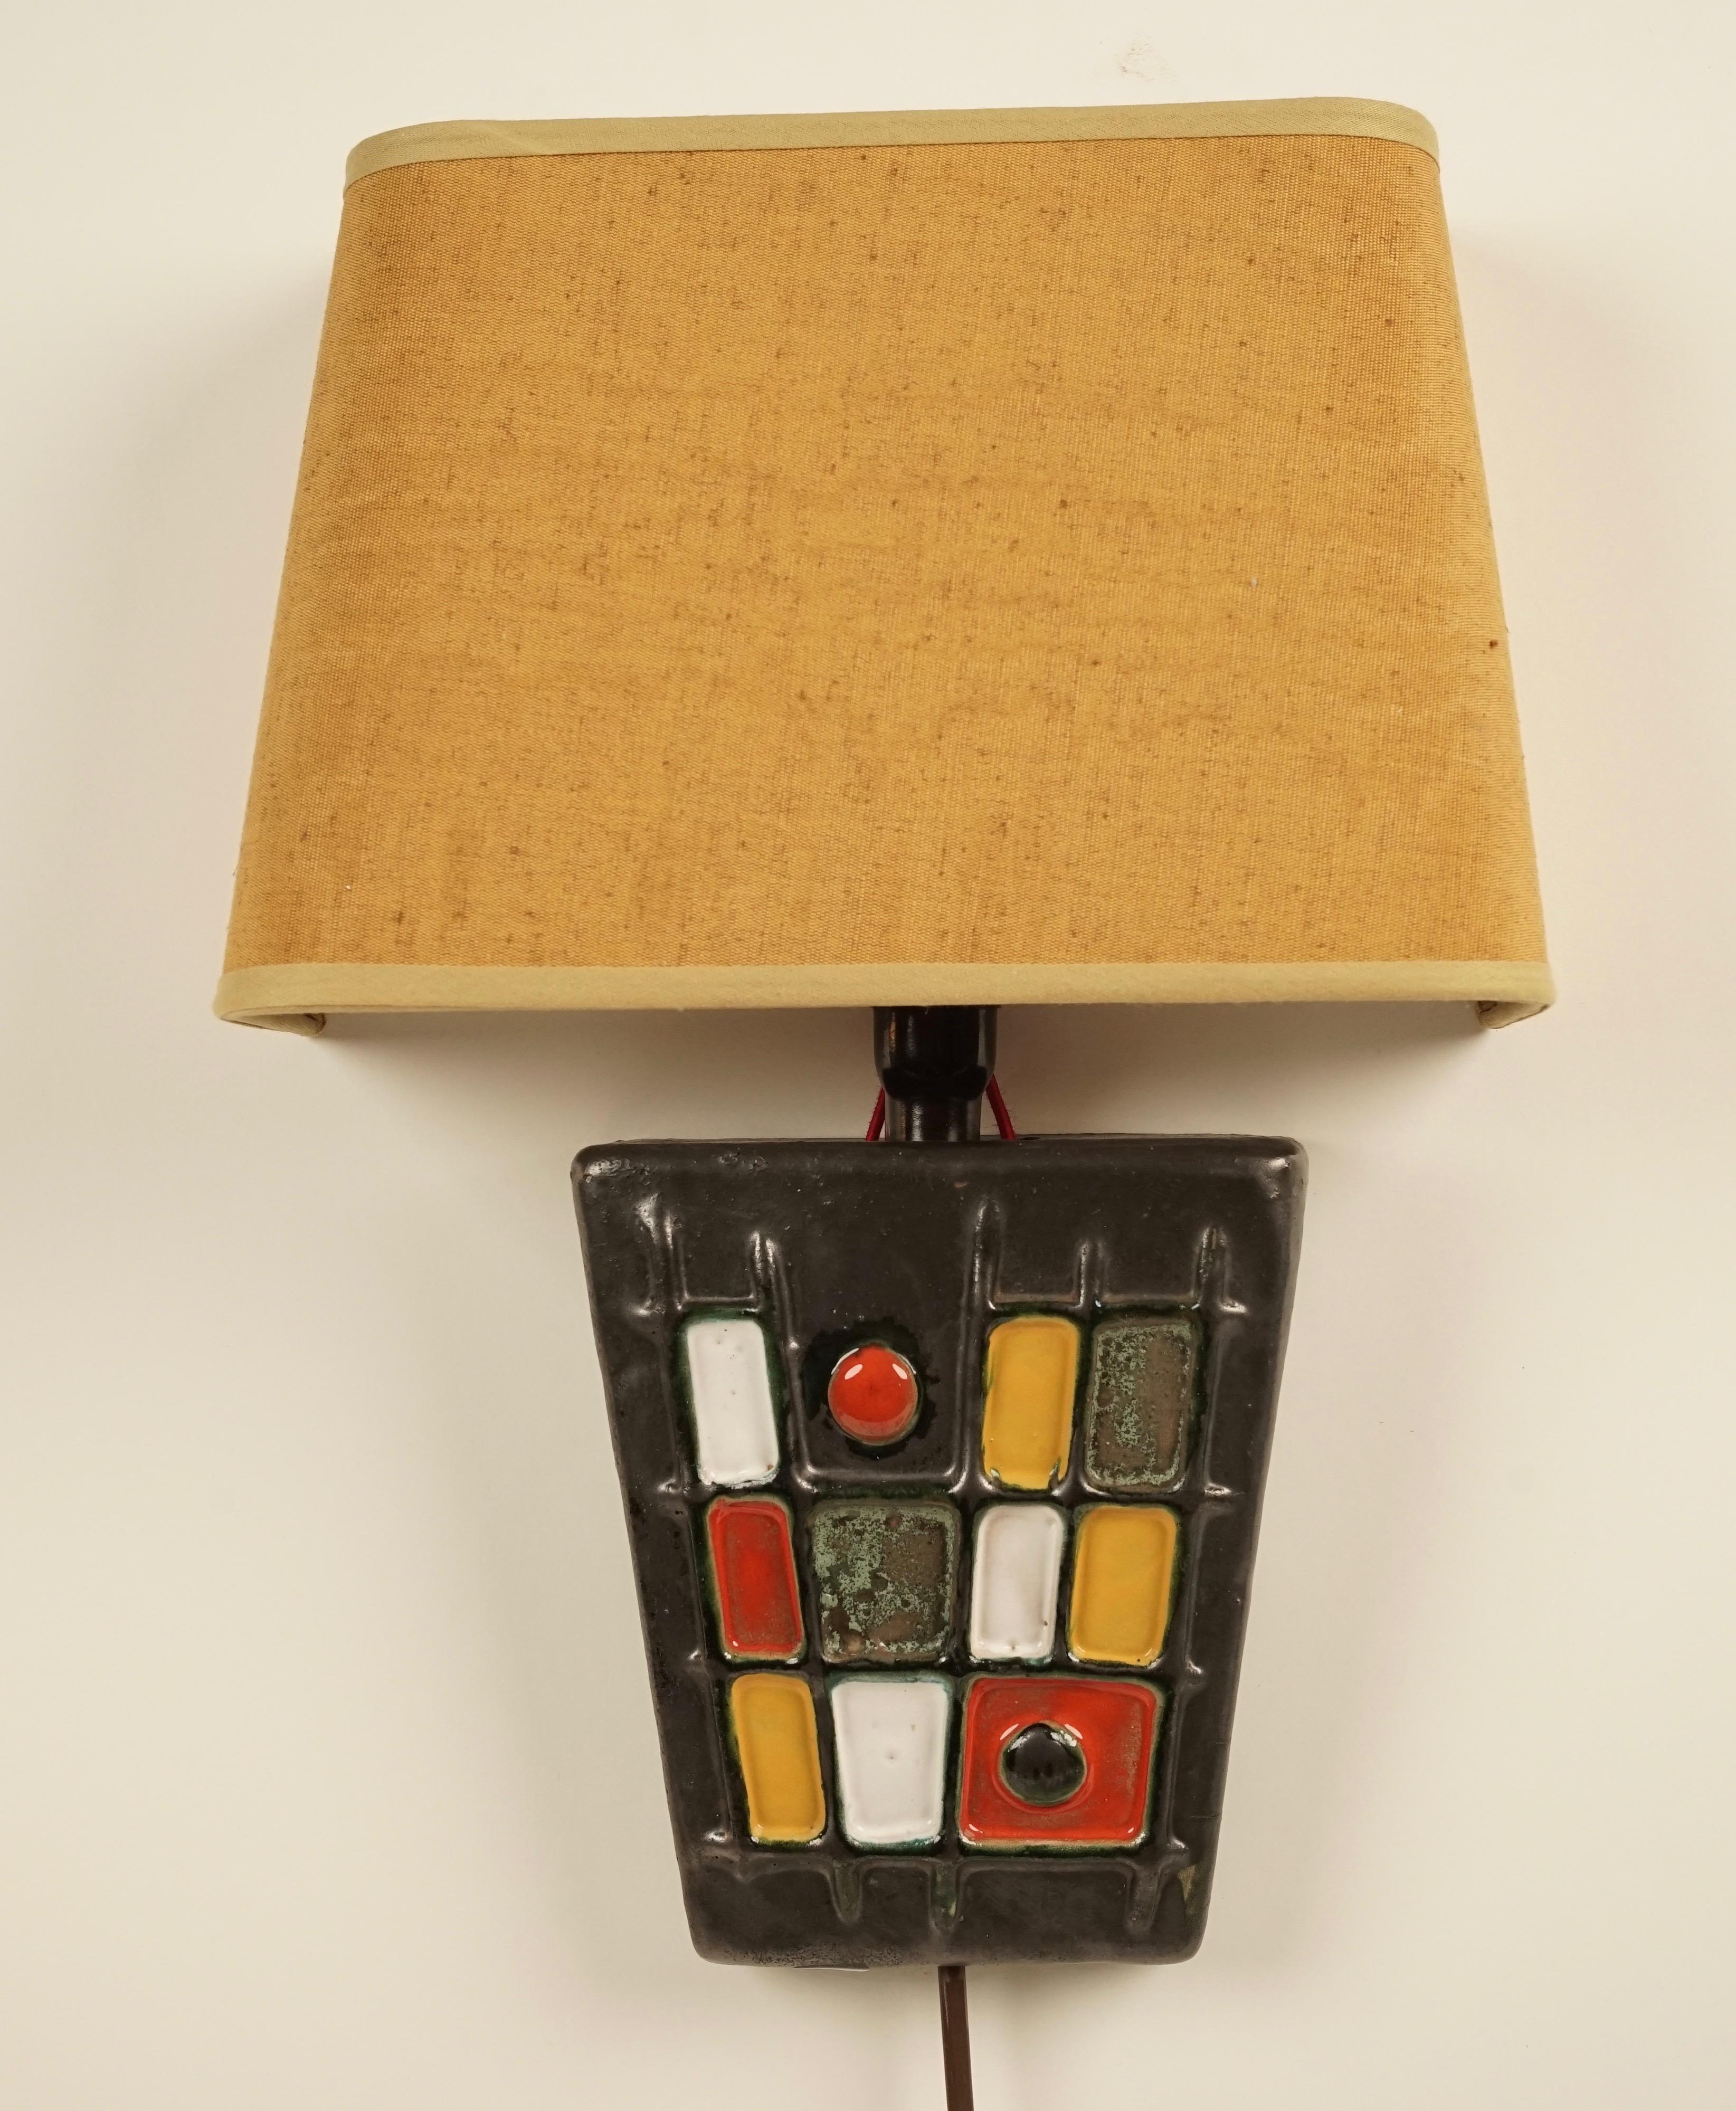 A pair of ceramic, modernist wall lights, handmade in the 1950s. These pieces were produced during the Studio Ceramic Movement in Hungary. This was a very special time in the history of contemporary ceramics in Europe. Due to language and political